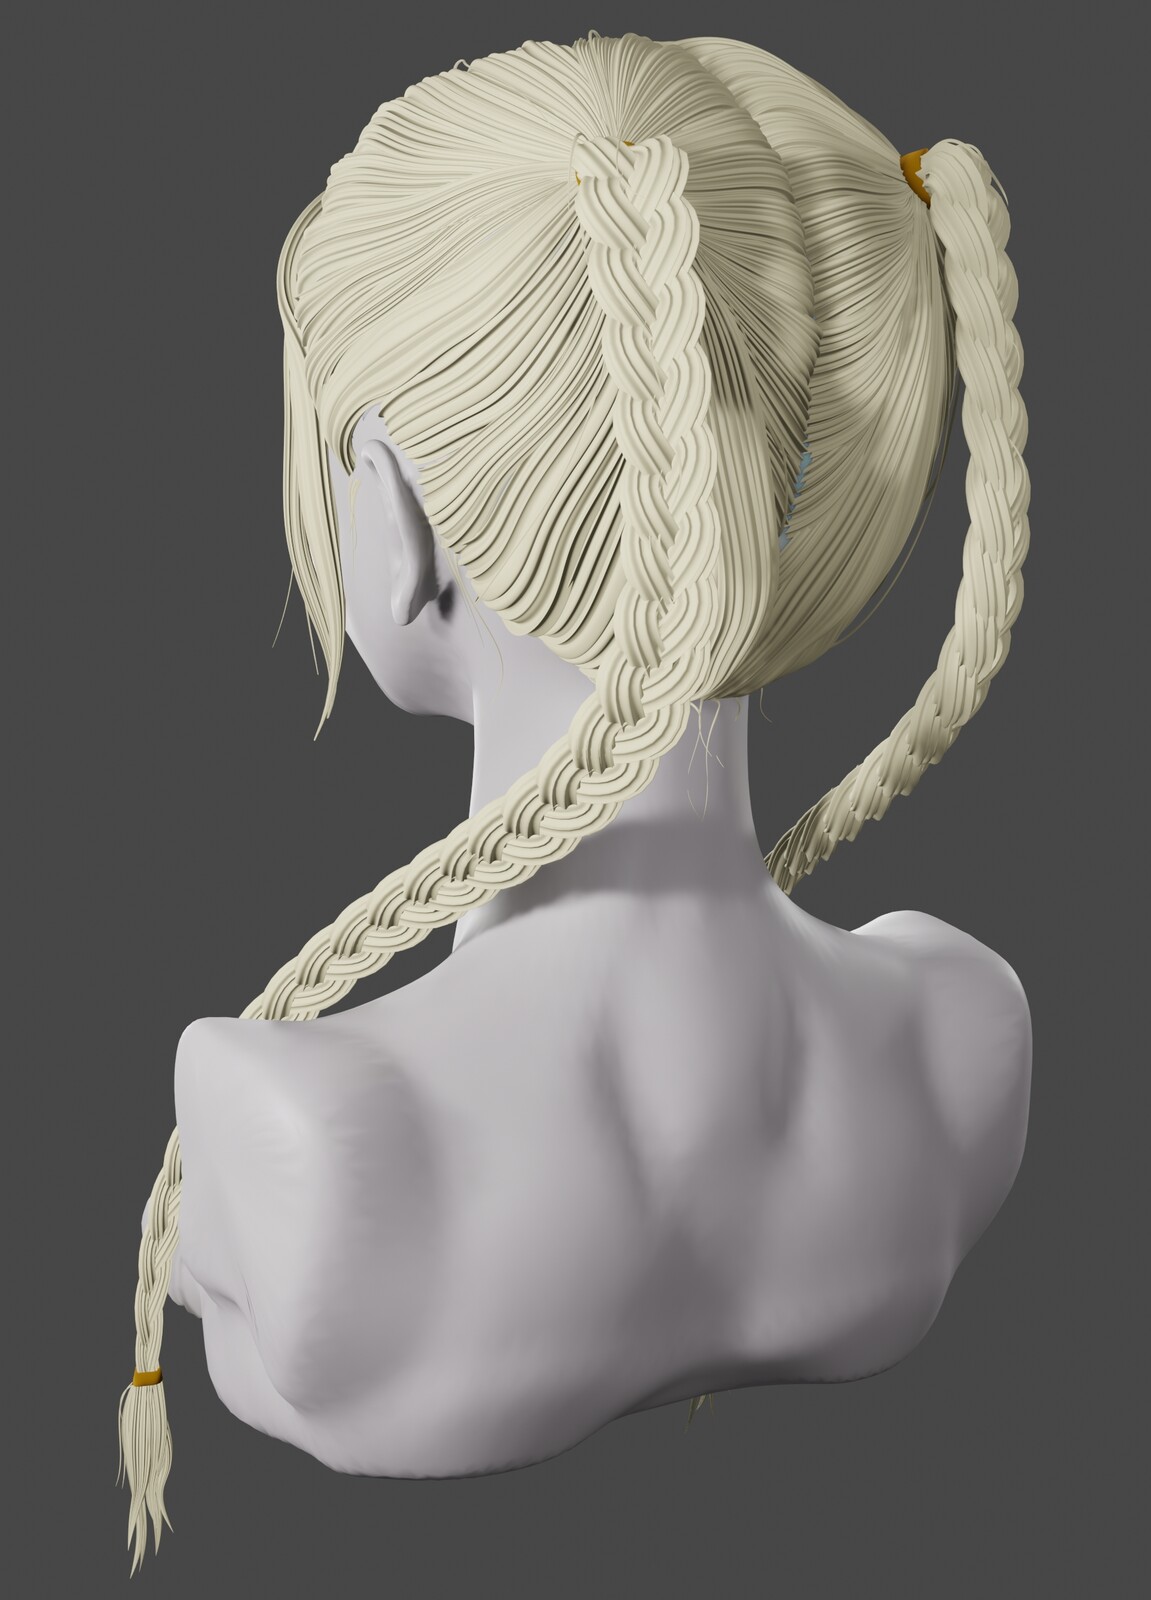 High braided ponytails from the back